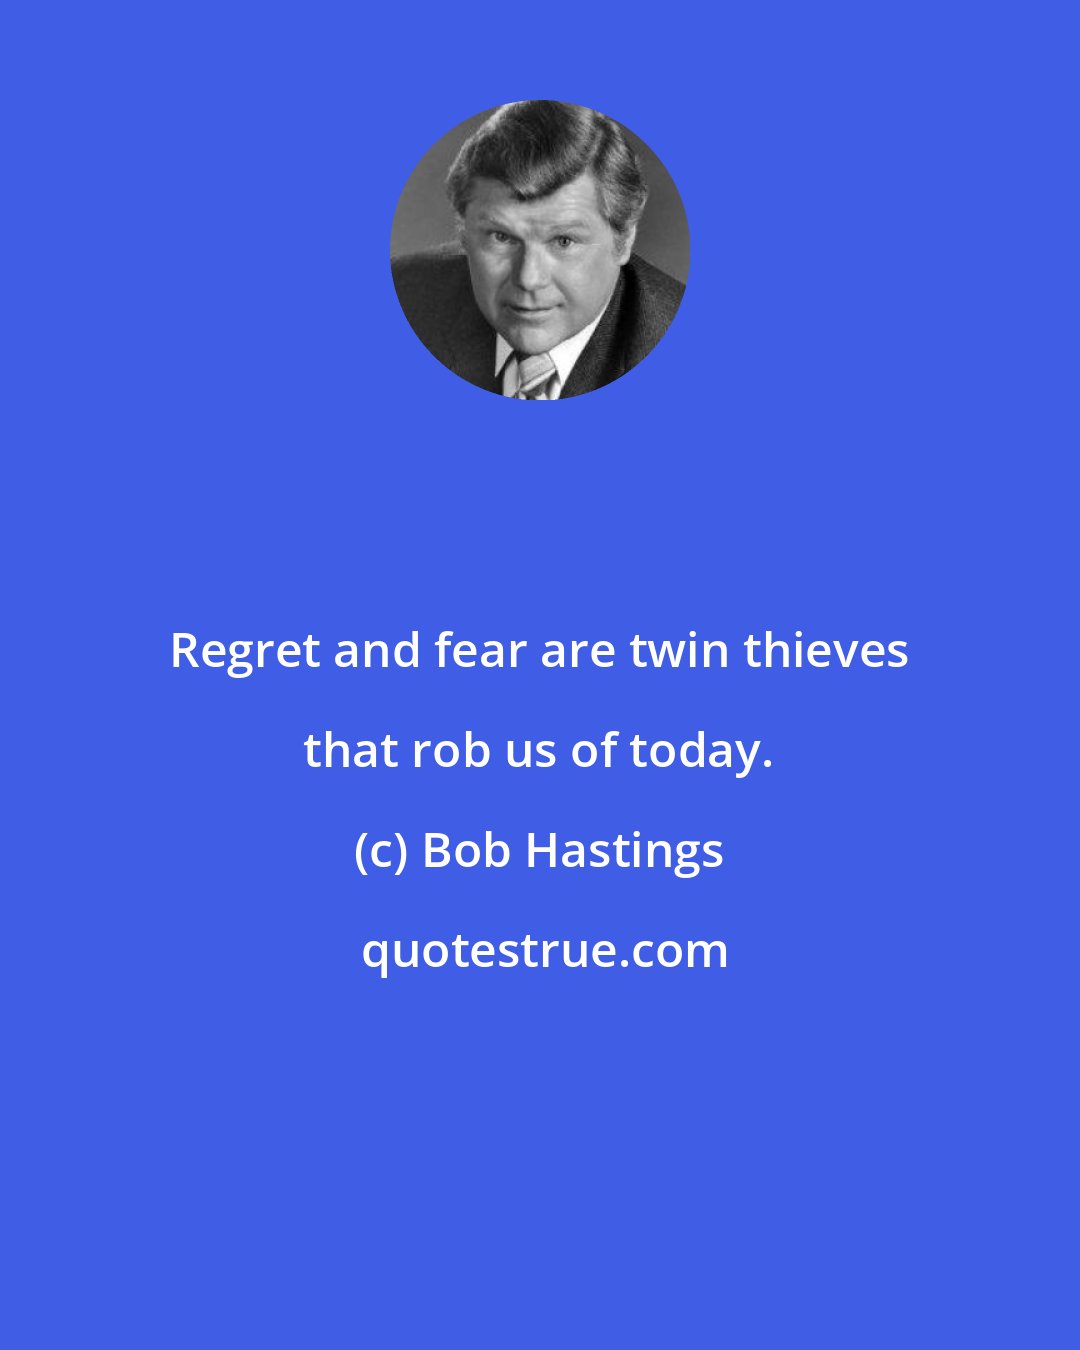 Bob Hastings: Regret and fear are twin thieves that rob us of today.